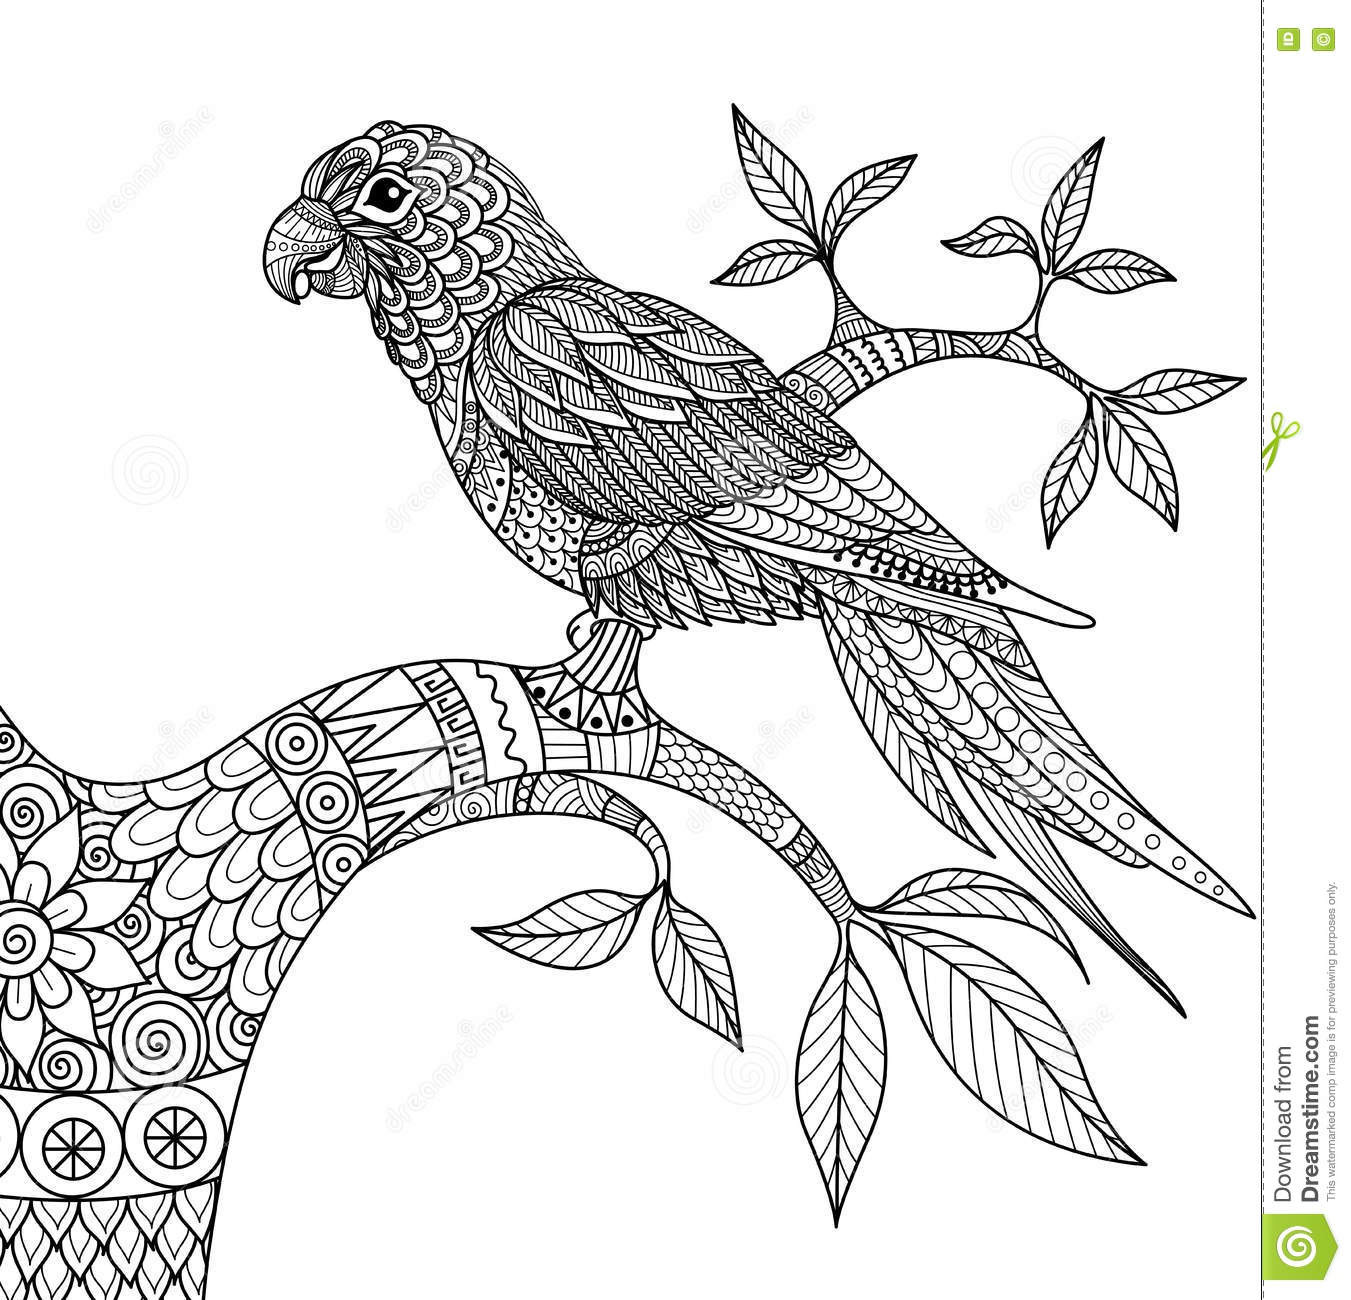 Best ideas about Parrot Coloring Pages For Adults
. Save or Pin Doodle Design Parrot Branch For Adult Coloring Book Now.